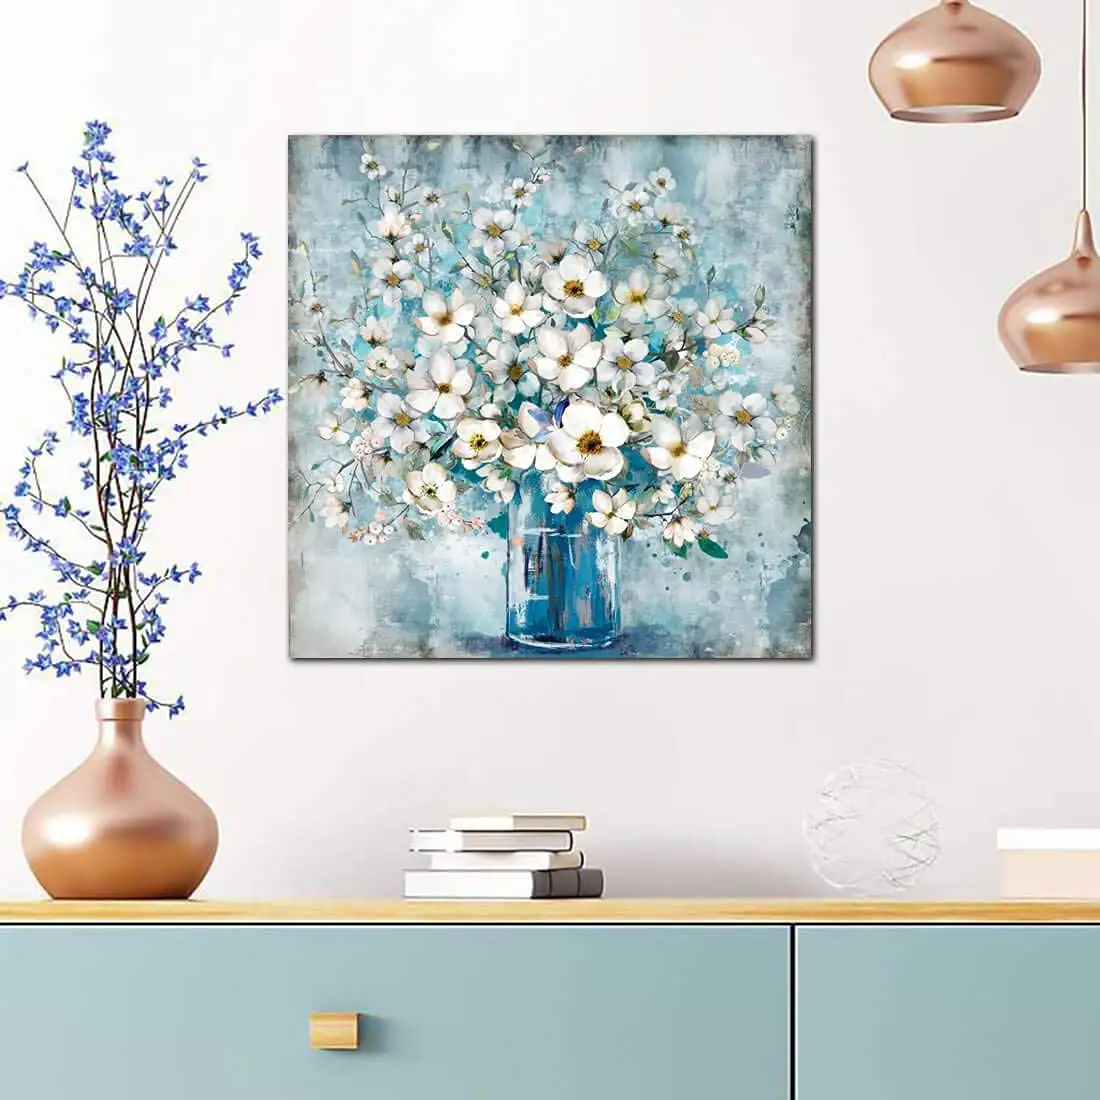 Stretched Canvas Wall Art Wall Decoration Modern Gallery Print White Flower in Blue Bottle Theme Picture Artwork for Home Decor